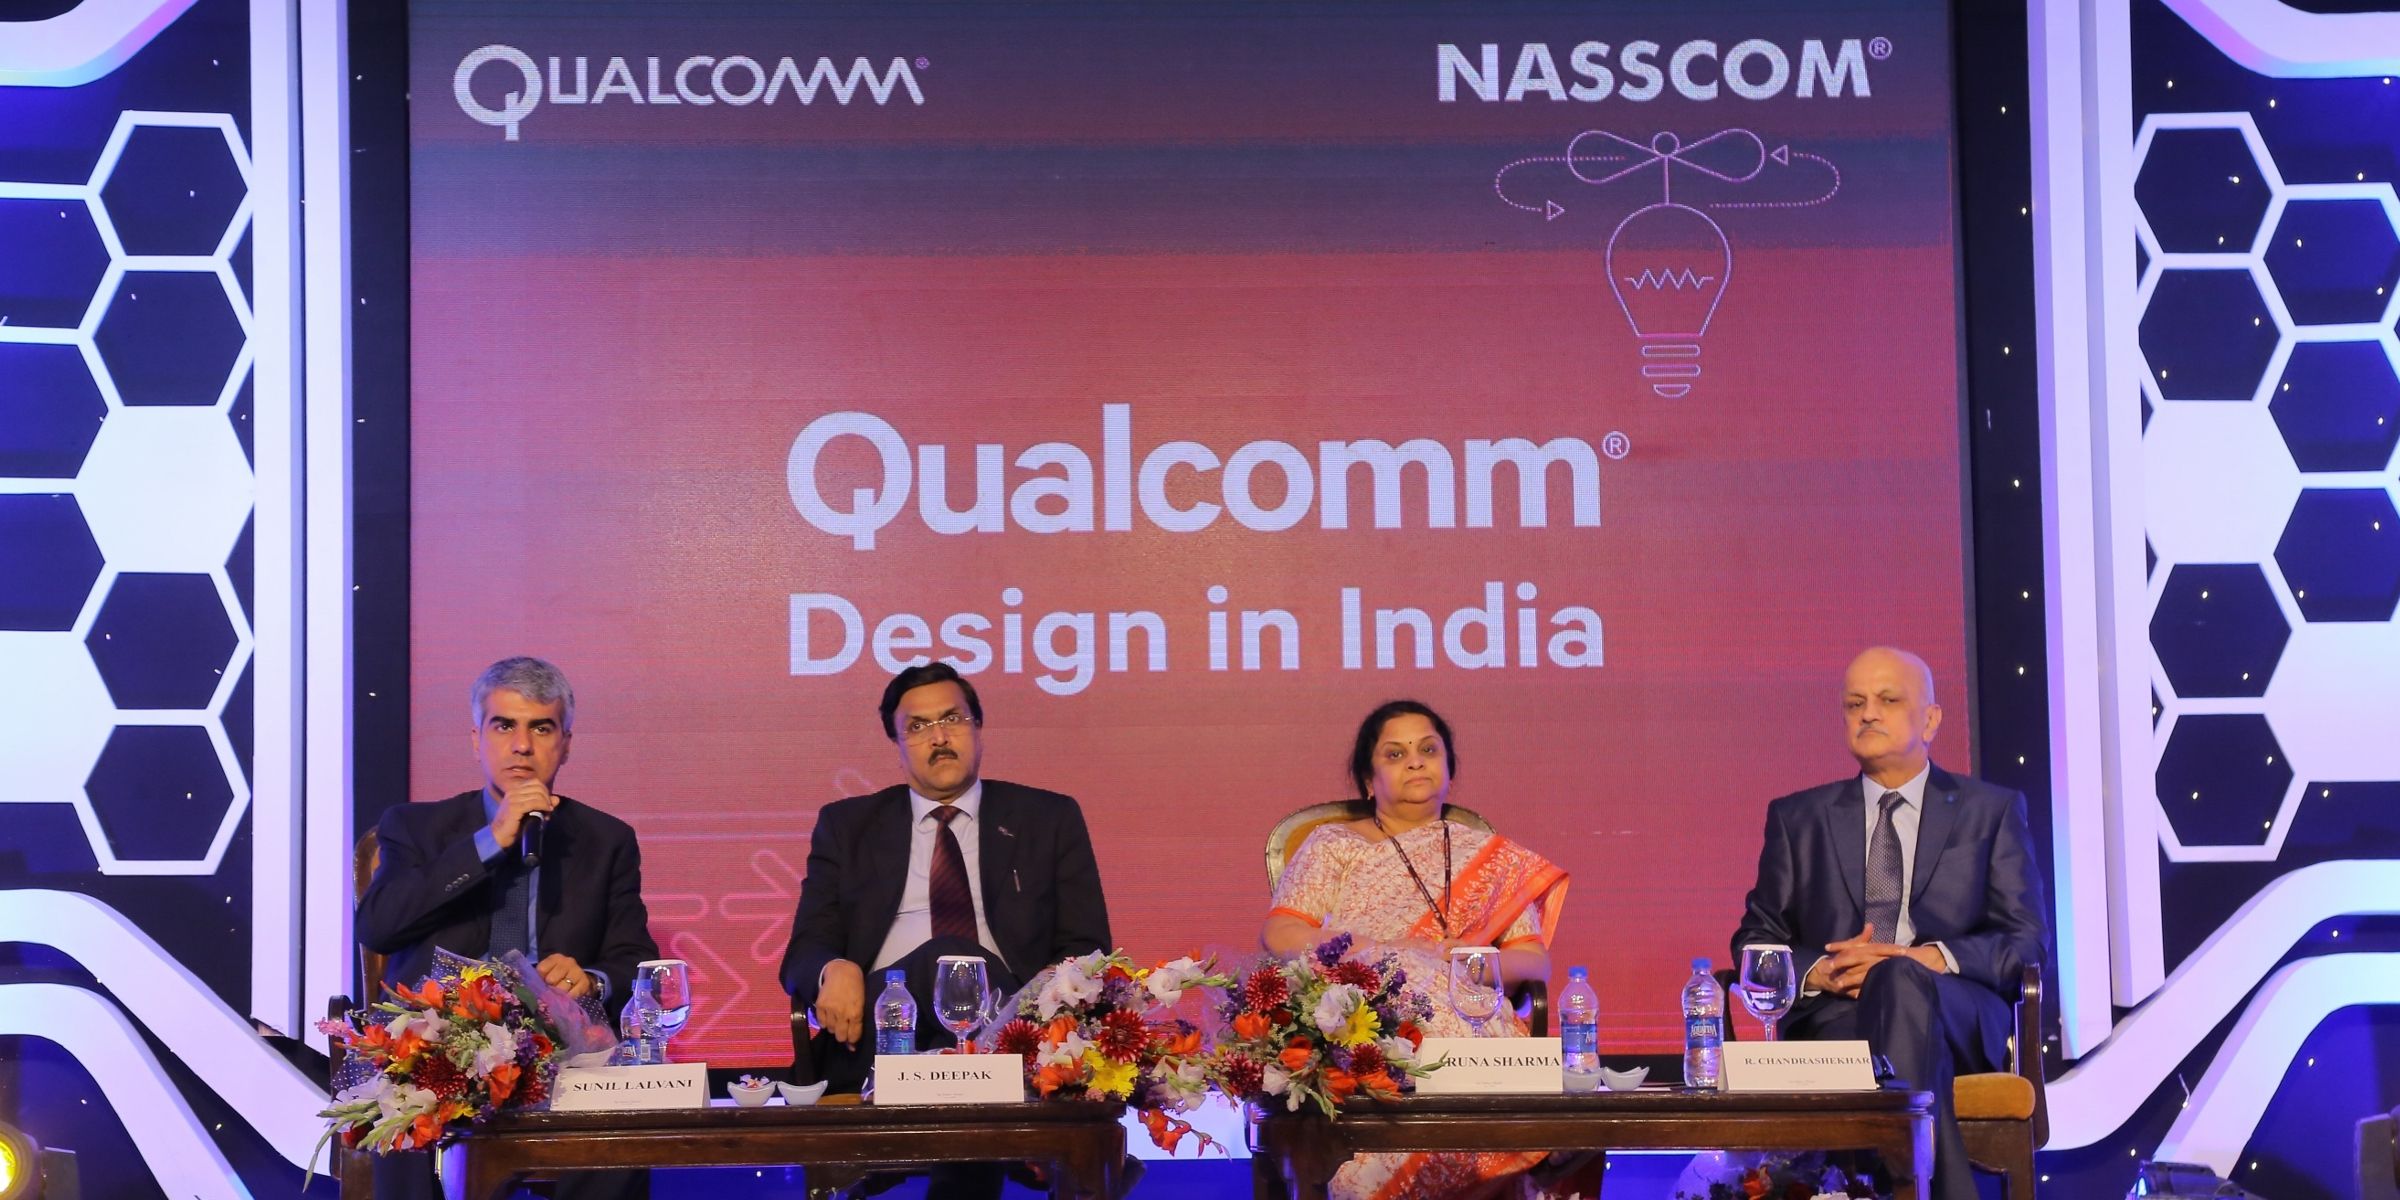 10 shortlisted companies receive $10,000 and a chance to win $100,000 as part of the Qualcomm® Design in India Challenge